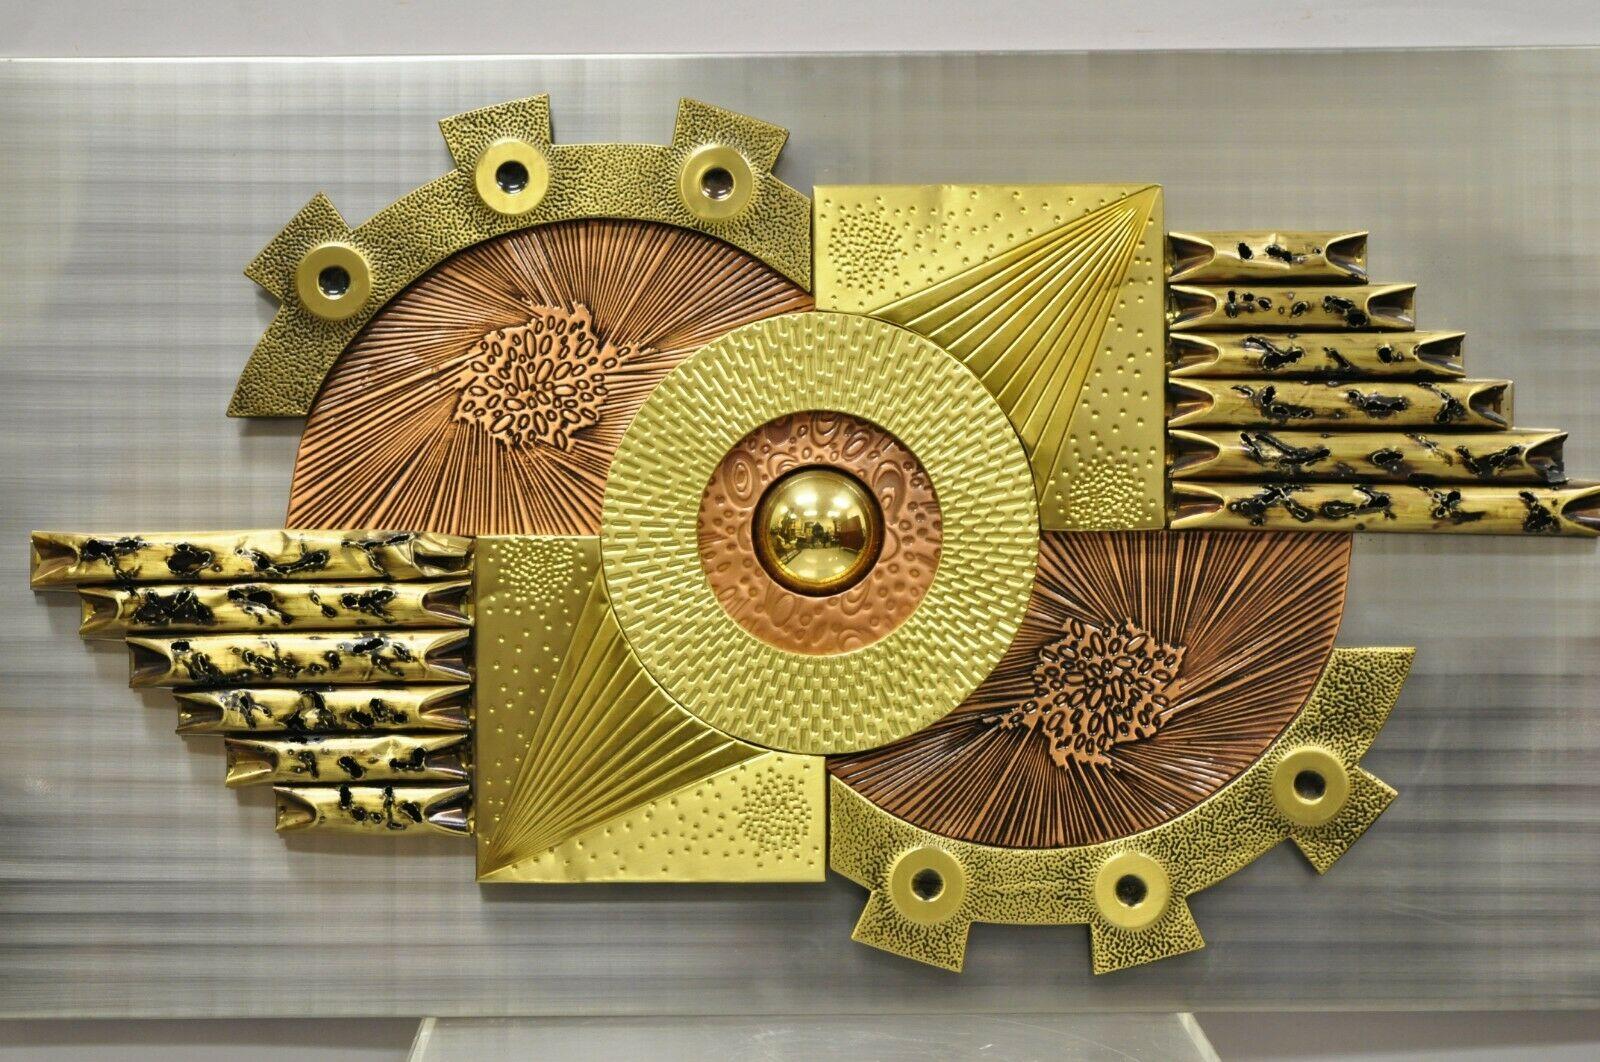 Vintage Stephen Chun Mid Century Brutalist Brass and Copper Abstract Wall Art, Unmarked. Item Circa Mid to Late 20th Century. Measurements: 20